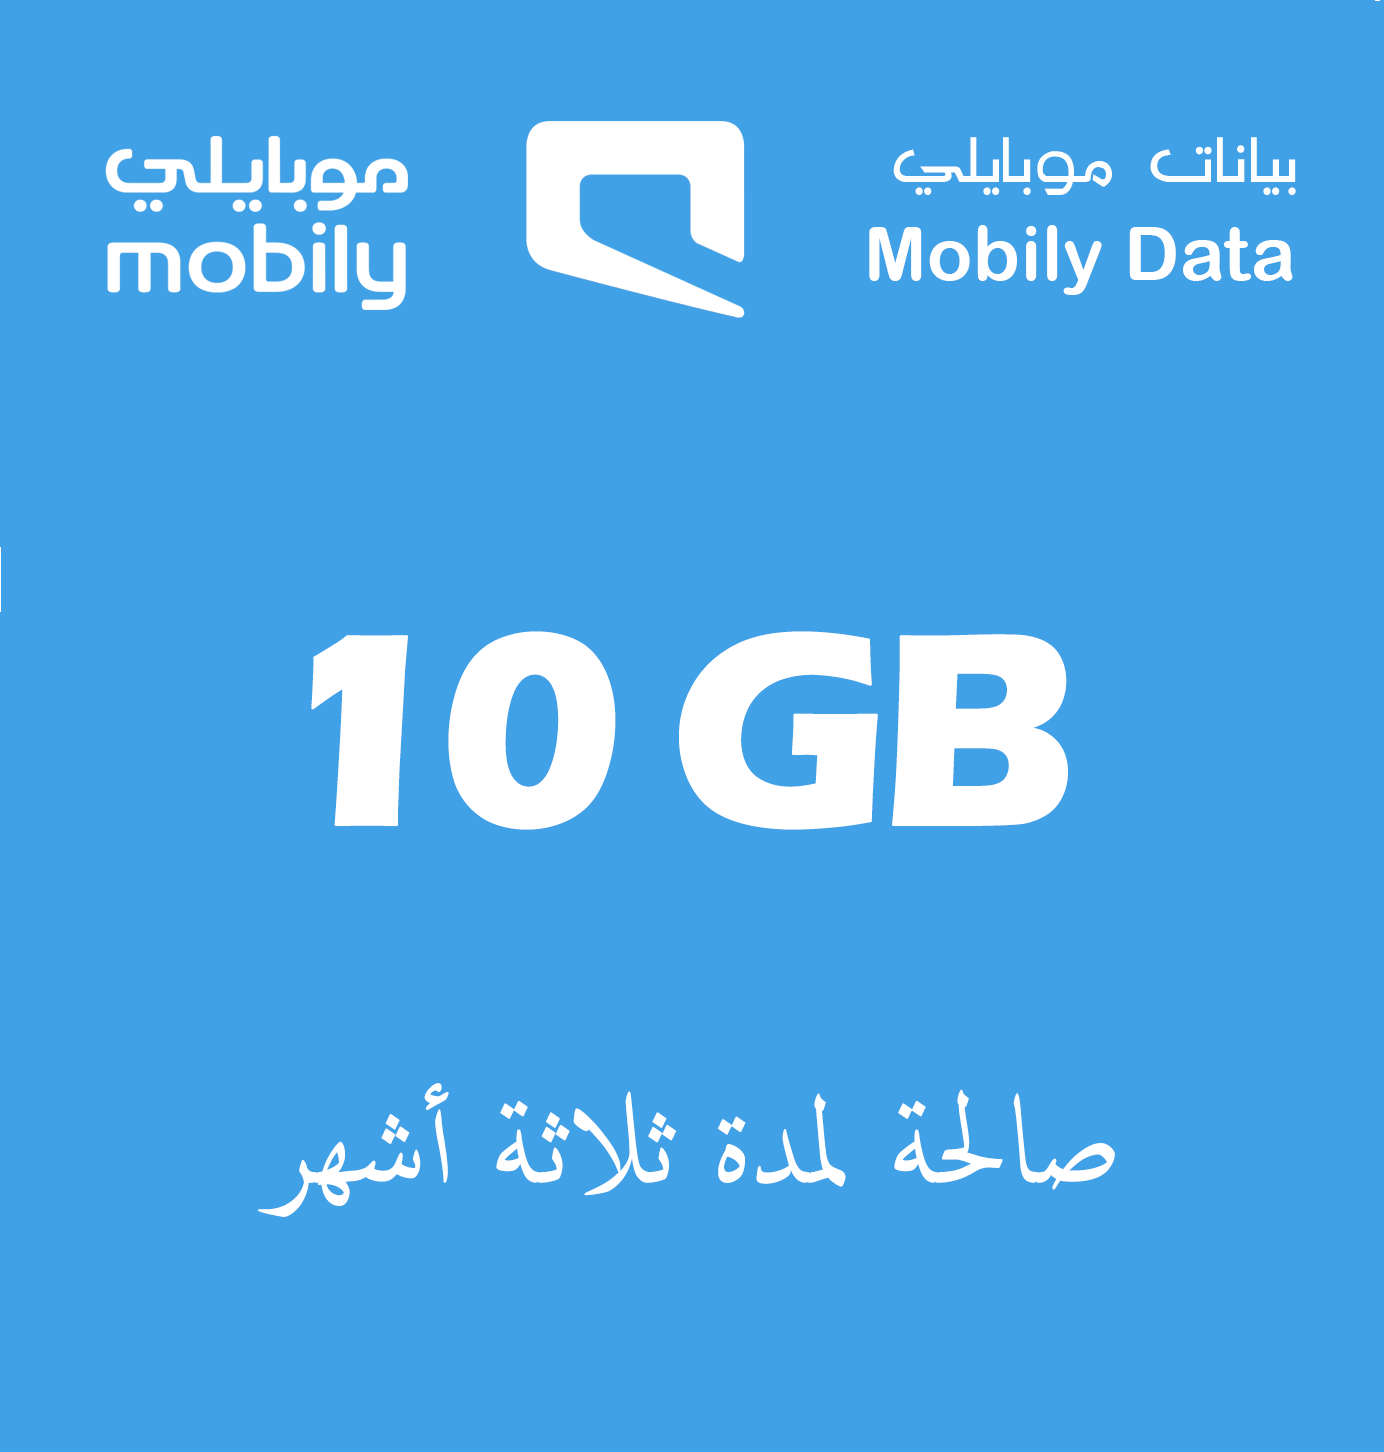 Mobily Internet Cards - 10GB for 3 months